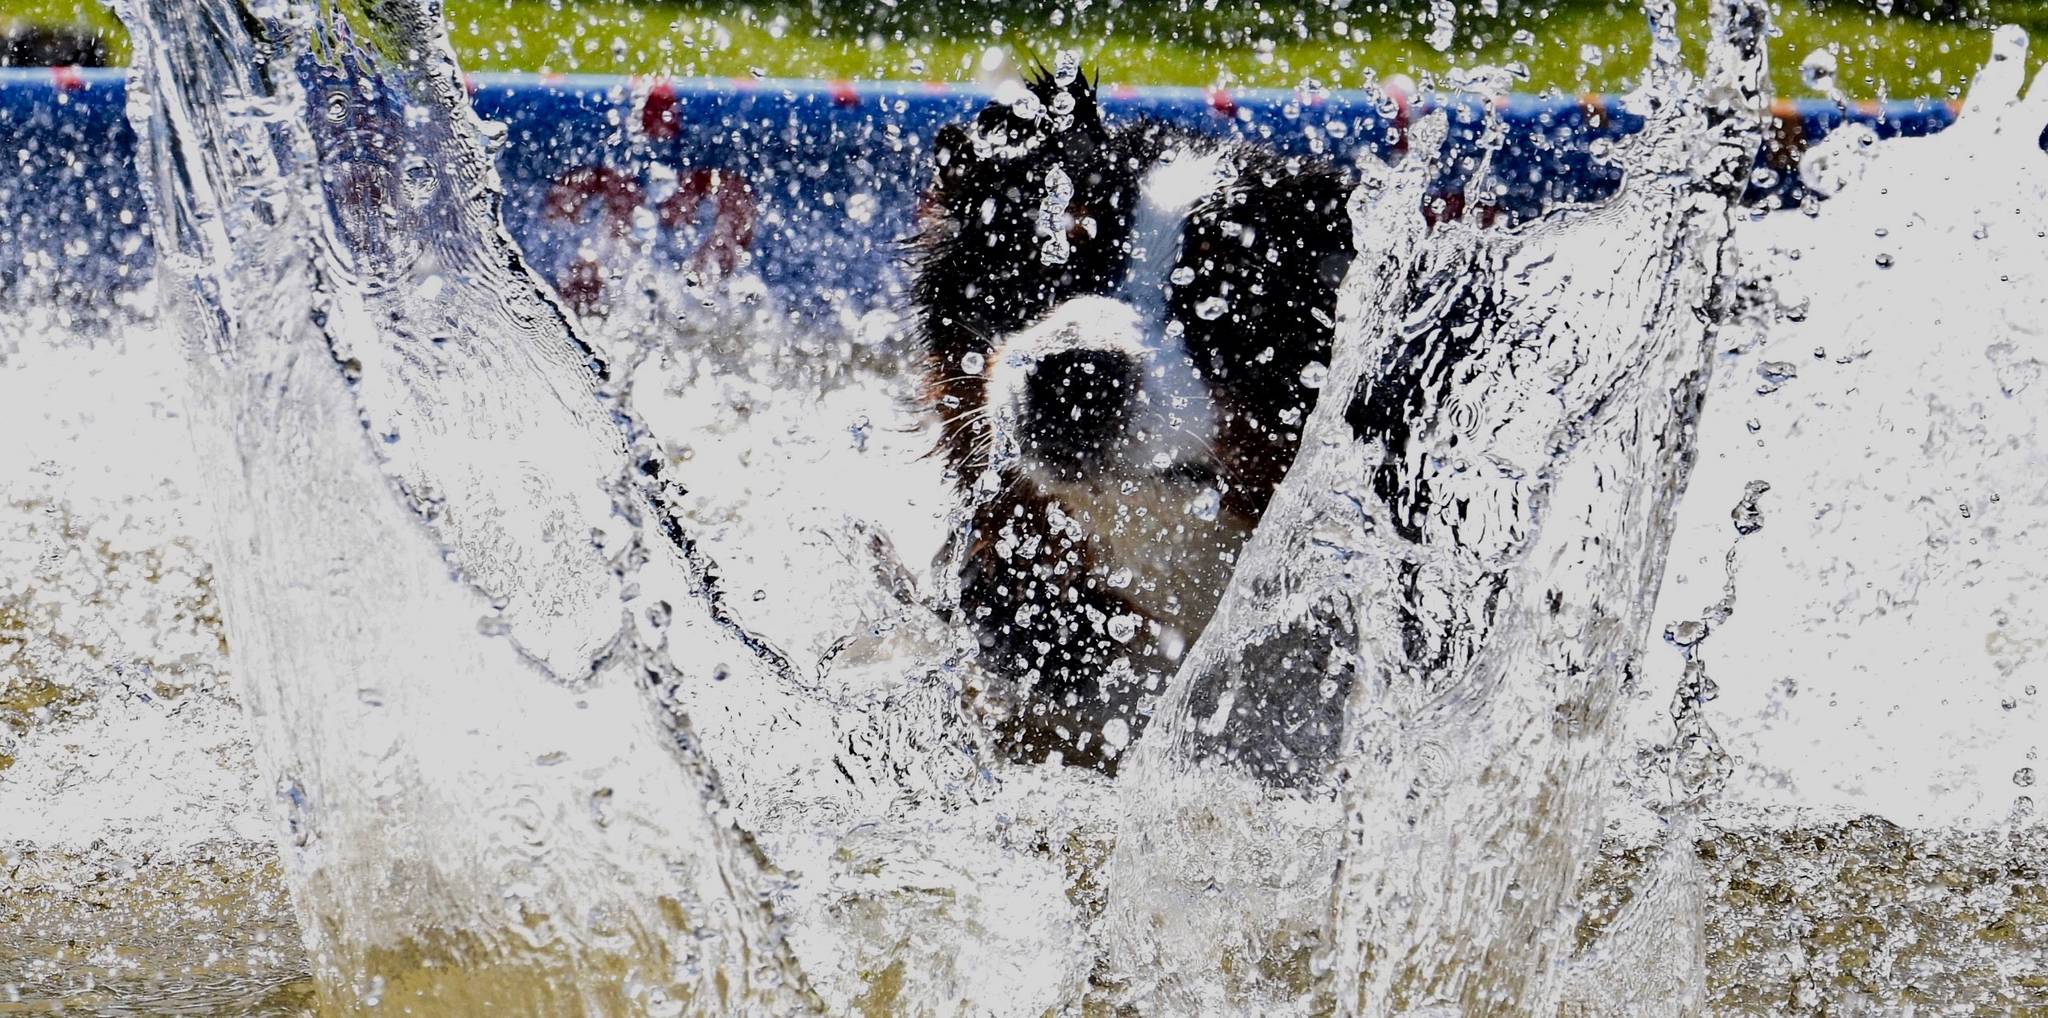 Bogart jumps far and plunges into a pool during the North America Diving Dogs (NADD) competition at Petpalooza on Saturday at Game Farm Park. Dock diving is one of the fastest growing sports for dogs. NADD is an organization working to enhance the sport with dock diving facilities and competitors throughout North America. RACHEL CIAMPI, Auburn Reporter